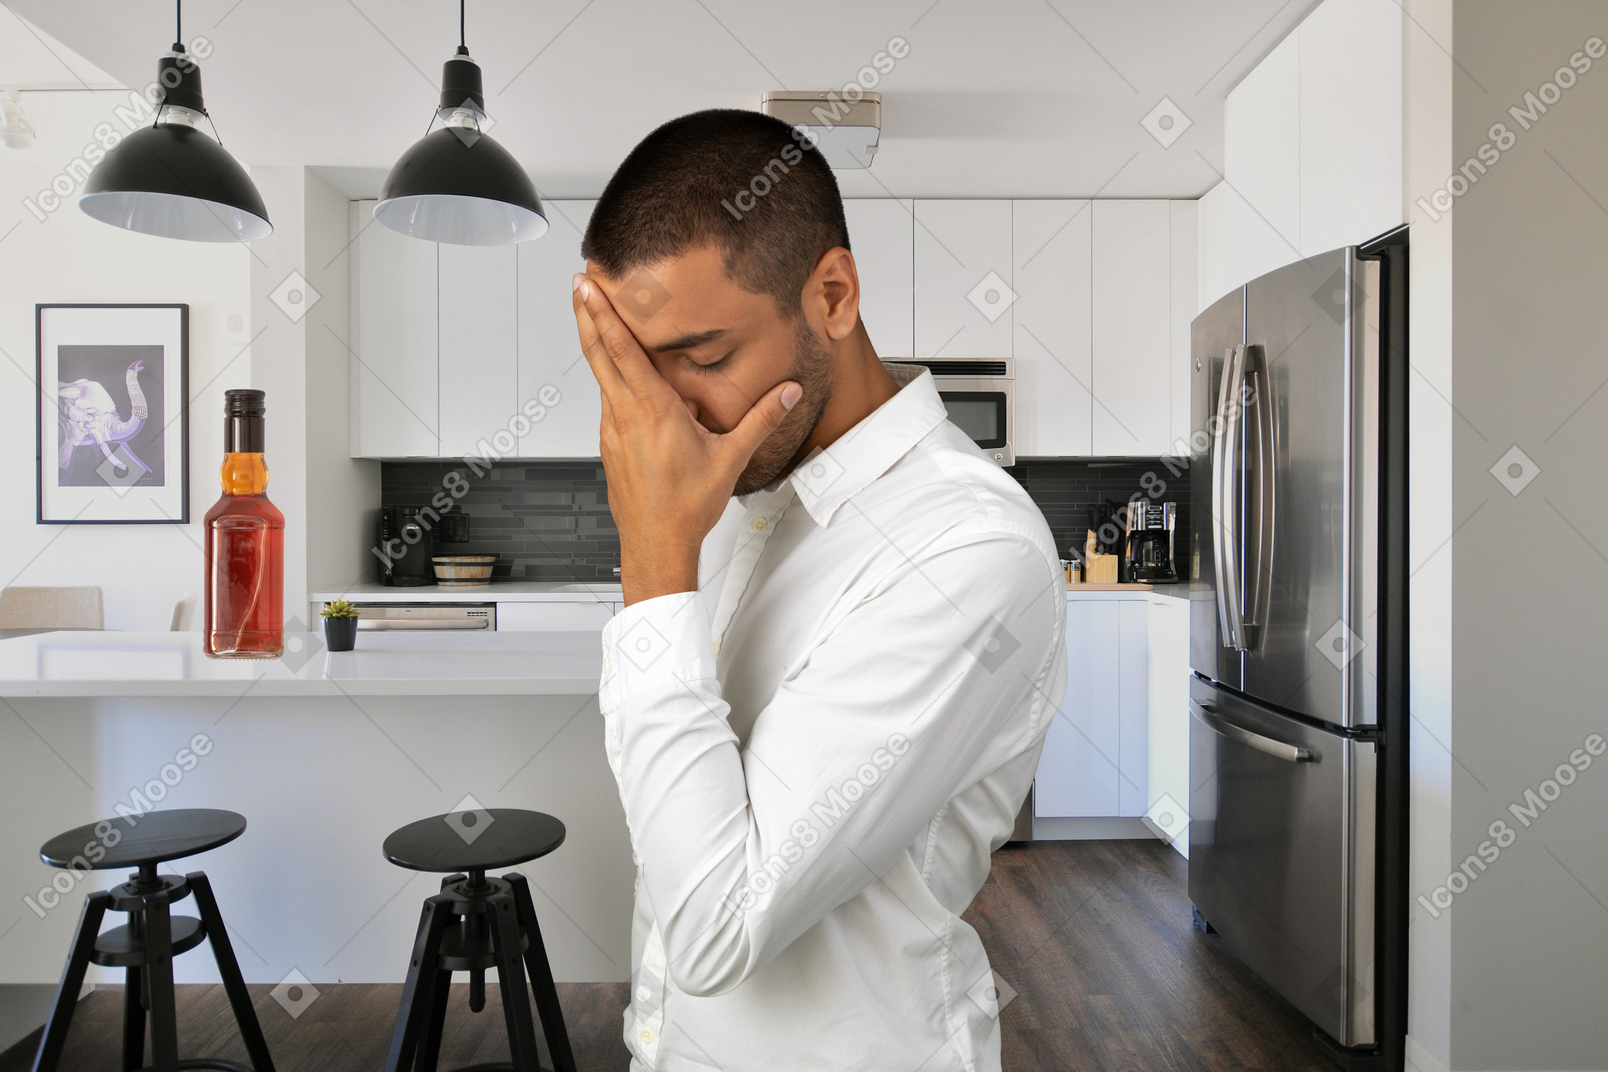 A man standing in a kitchen holding his head